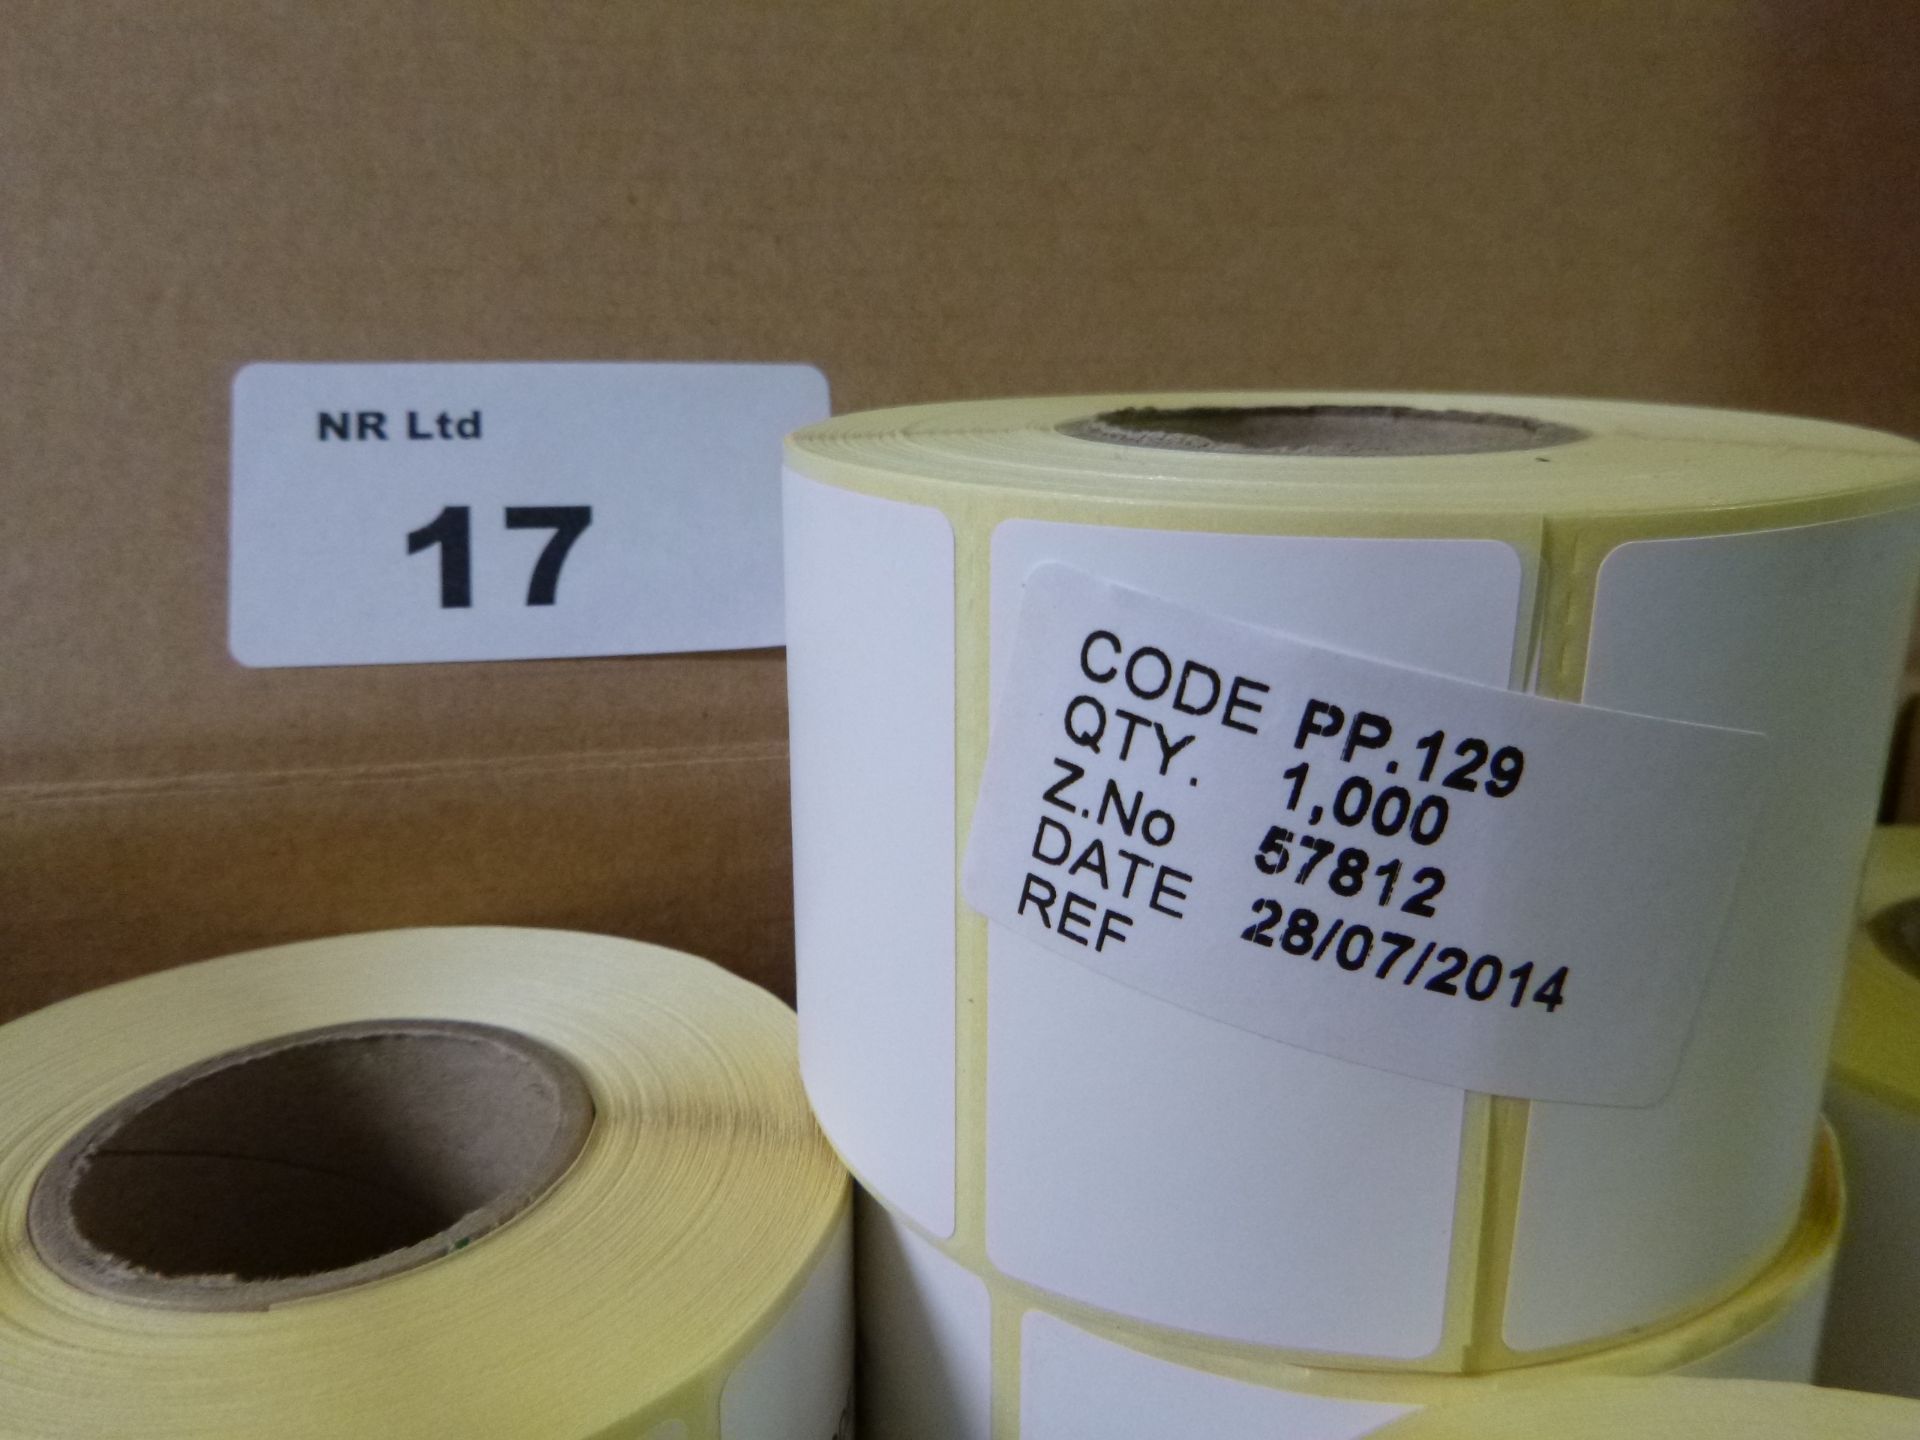 14 X ROLLS OF ZEBRA DIRECT THERMAL LABELS TYPE A. EACH ROLL CONTAINS 1000 LABELS 55MM X 17MM - Image 2 of 2